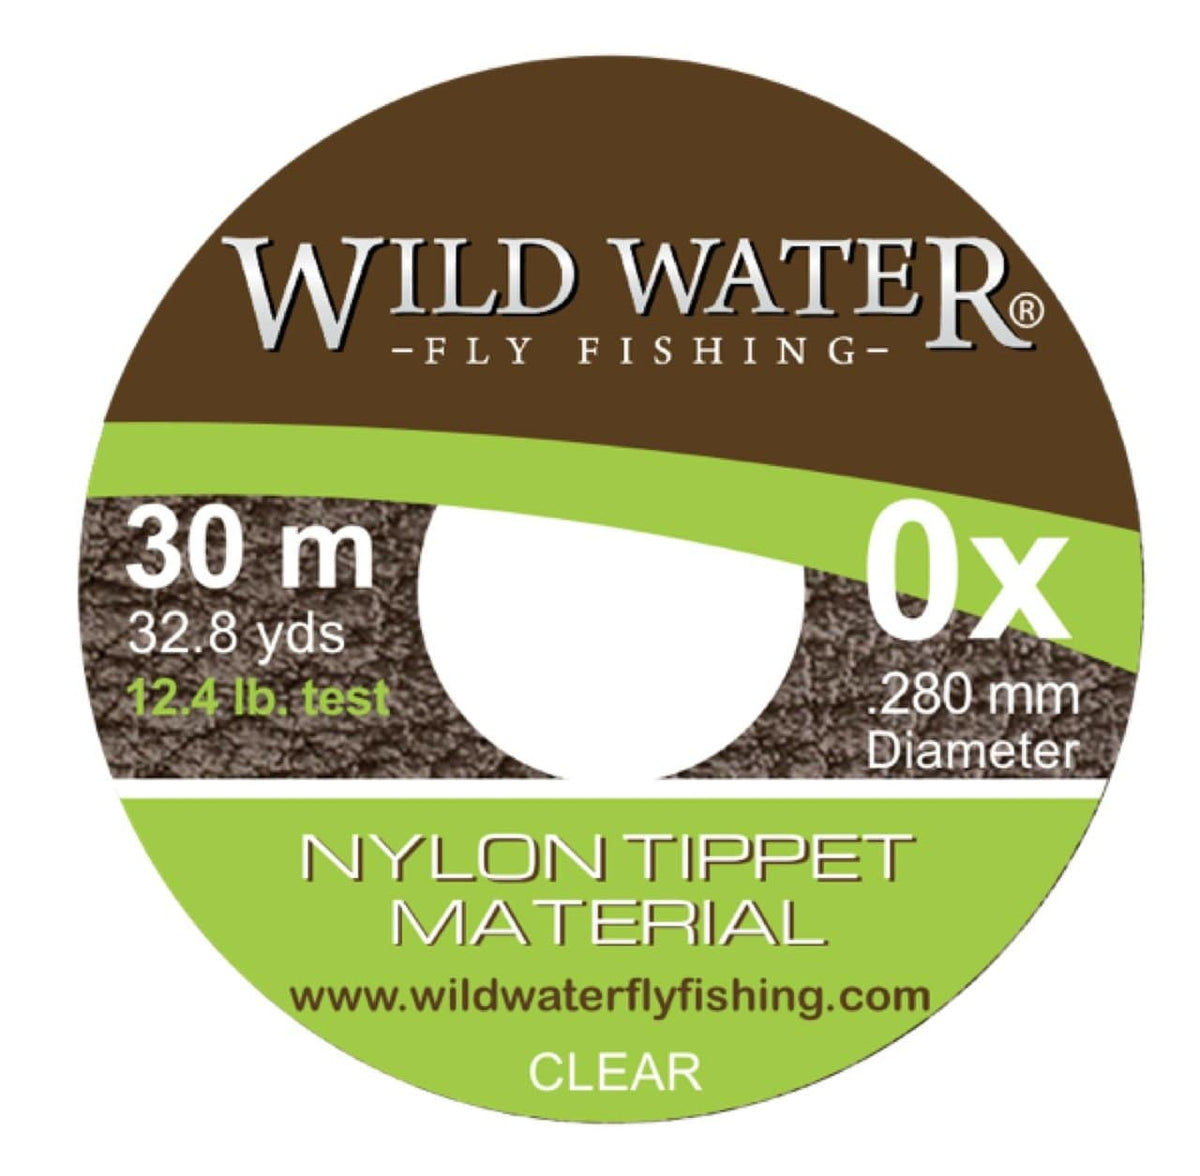 Wild Water Fly Fishing 0x Tippet Spool, 30m Length